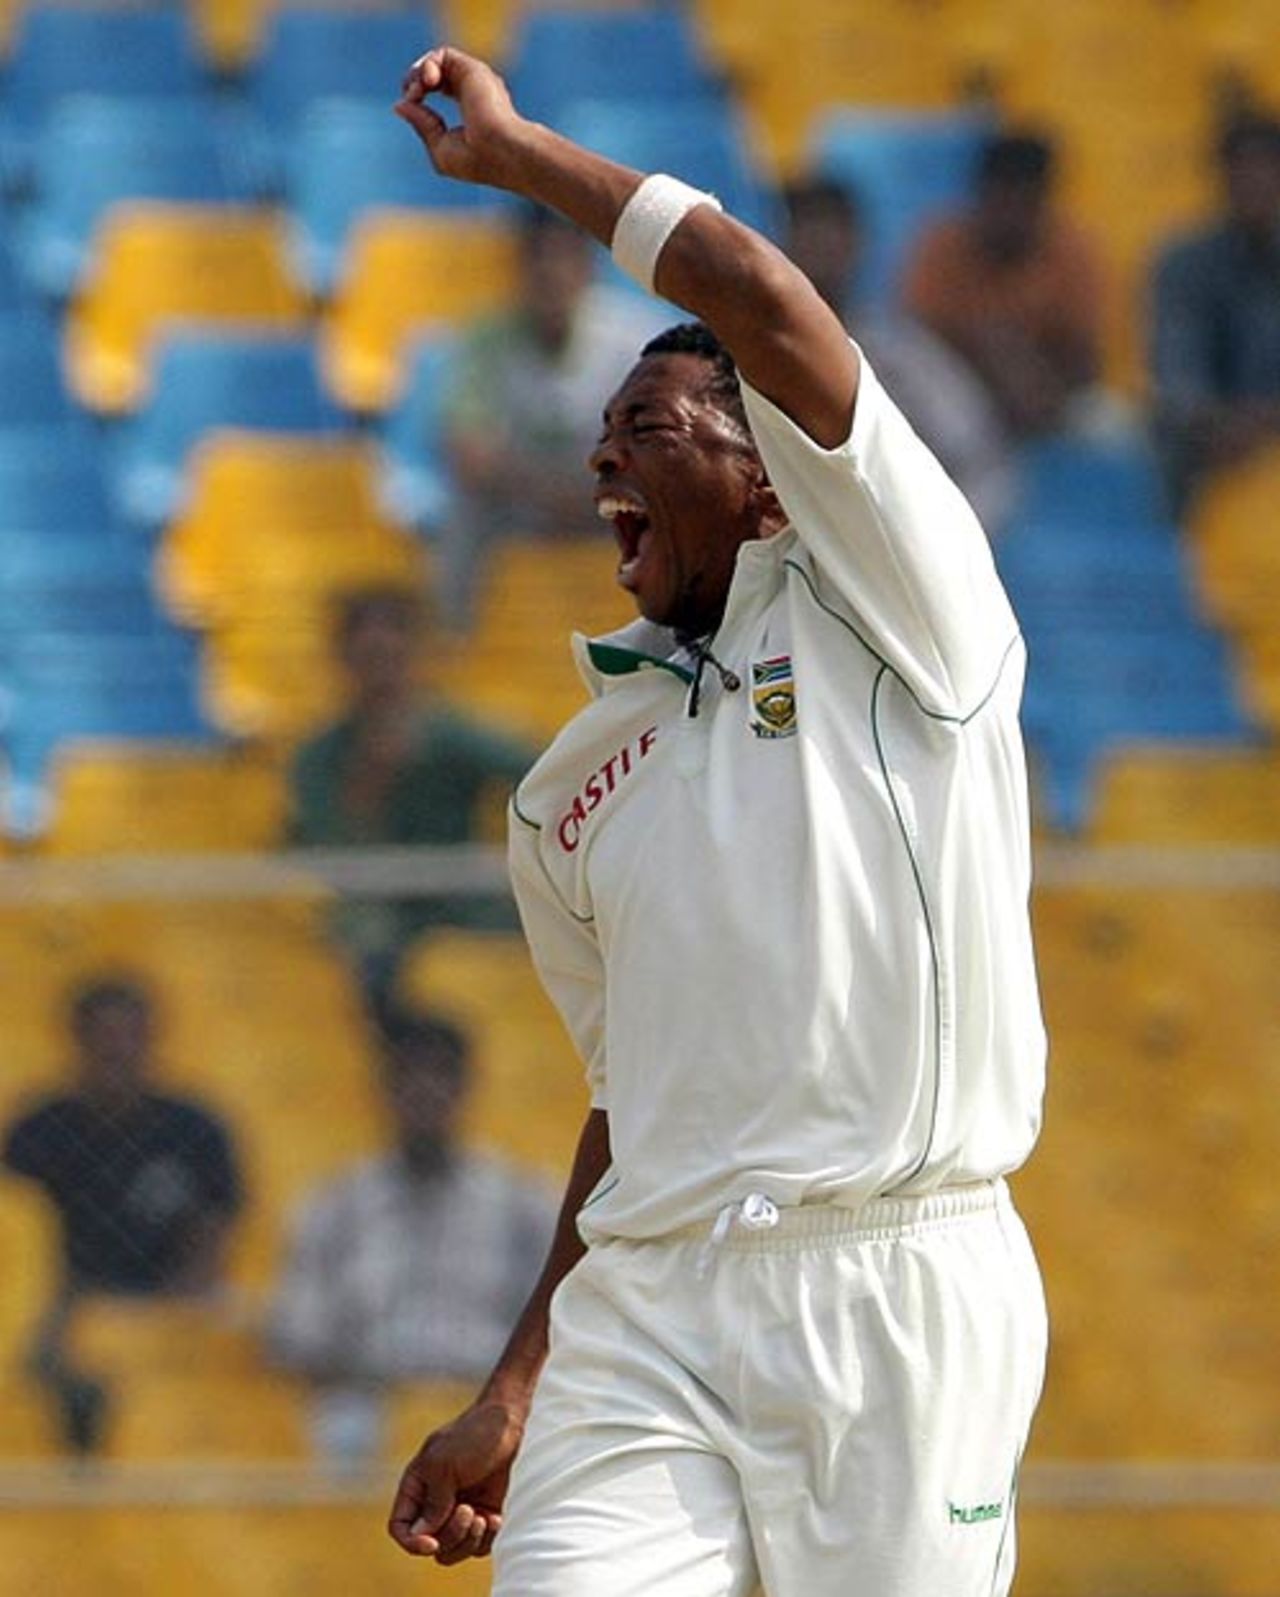 Makhaya Ntini is cock-a-hoop after trapping Virender Sehwag lbw, India v South Africa, 2nd Test, Ahmedabad, 3rd day, April 5, 2008